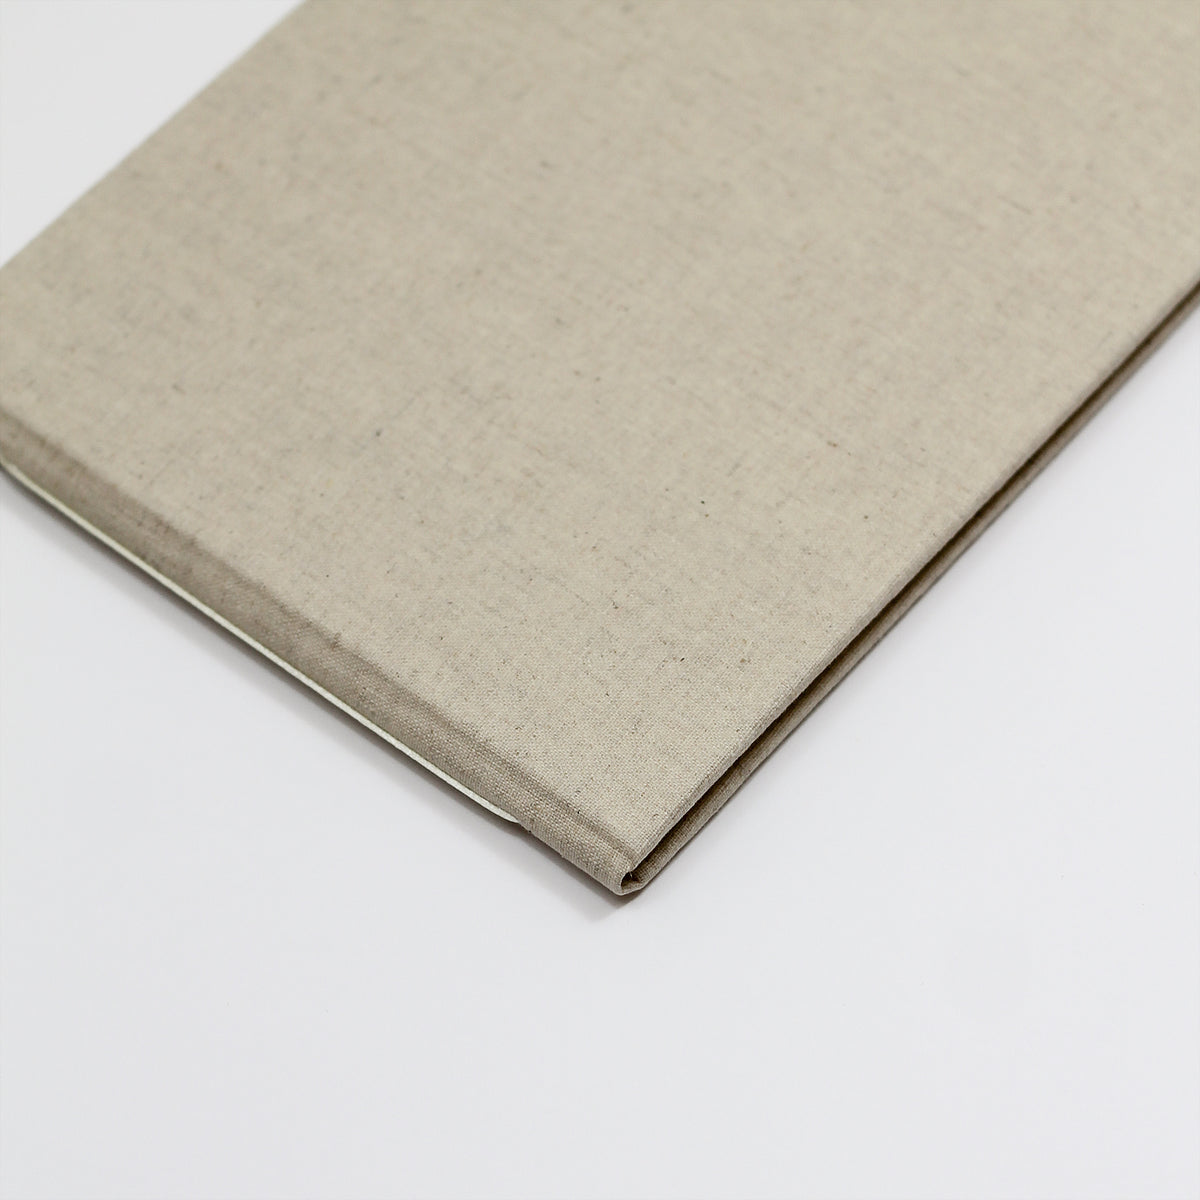 Guestbook Embossed with “Guests” | Cover: Natural Linen | Available Personalized